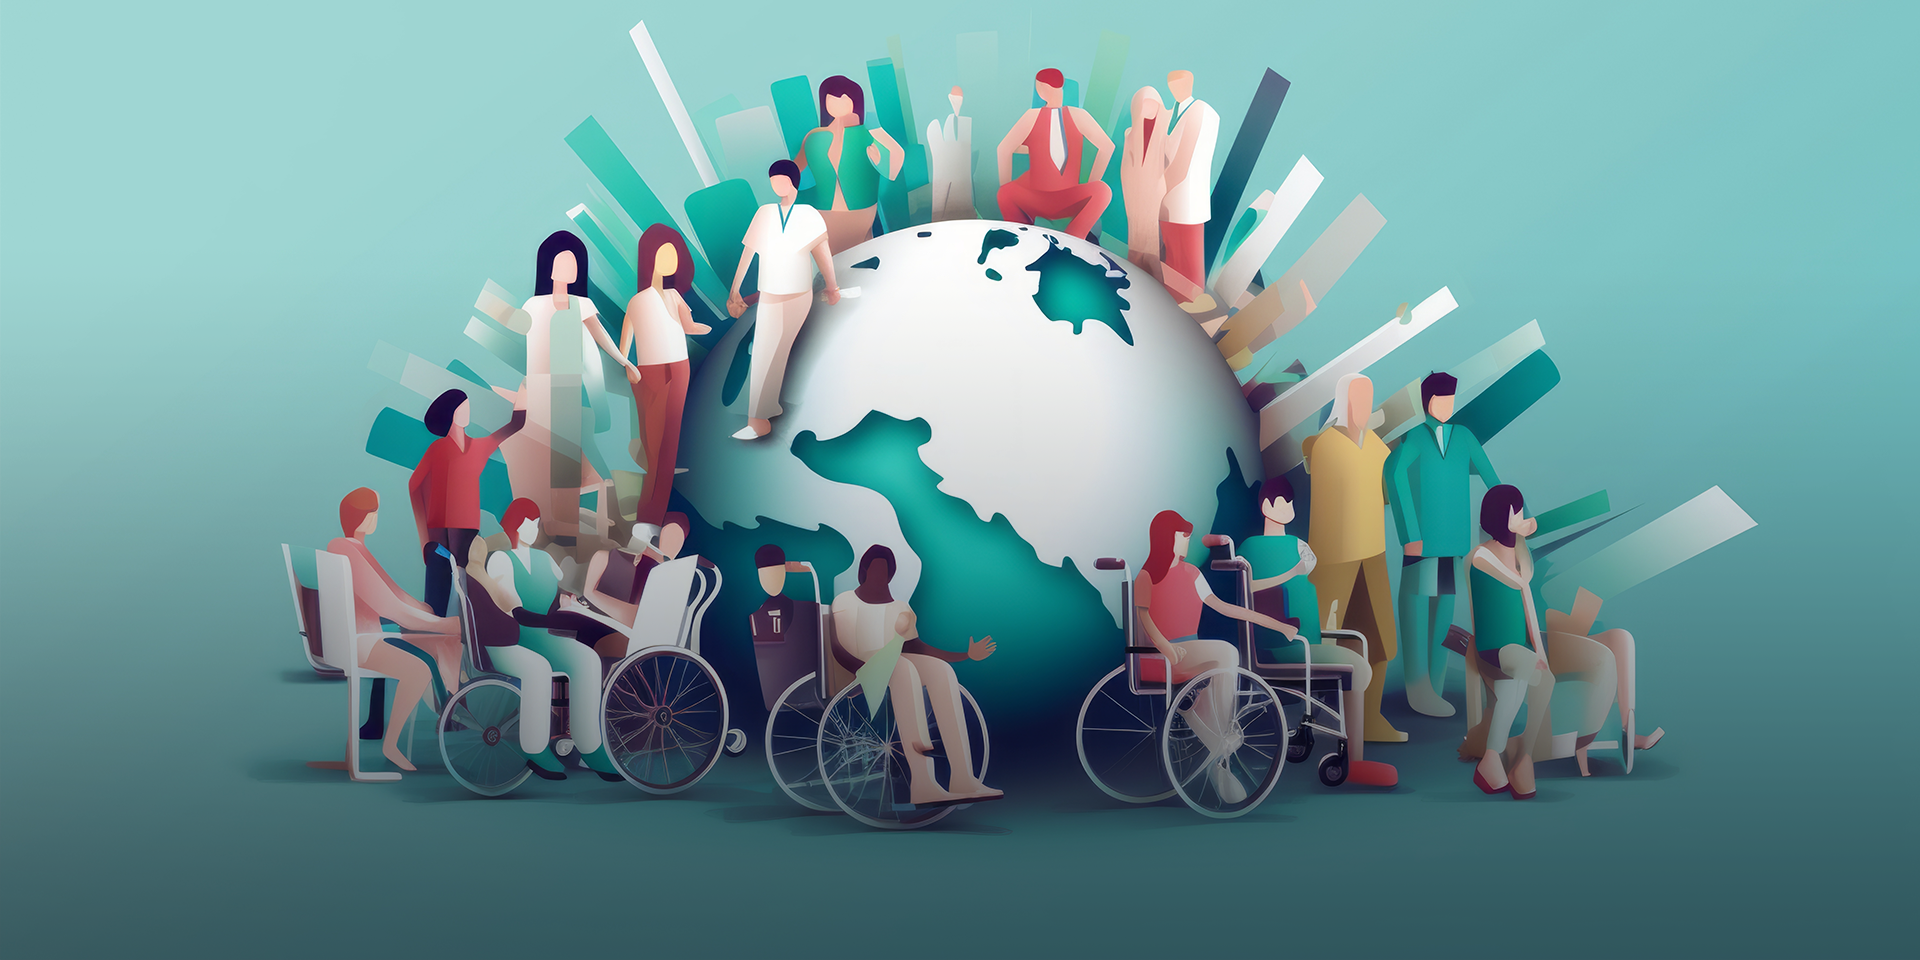 Illustration of an globe on teal background with diverse people around it.